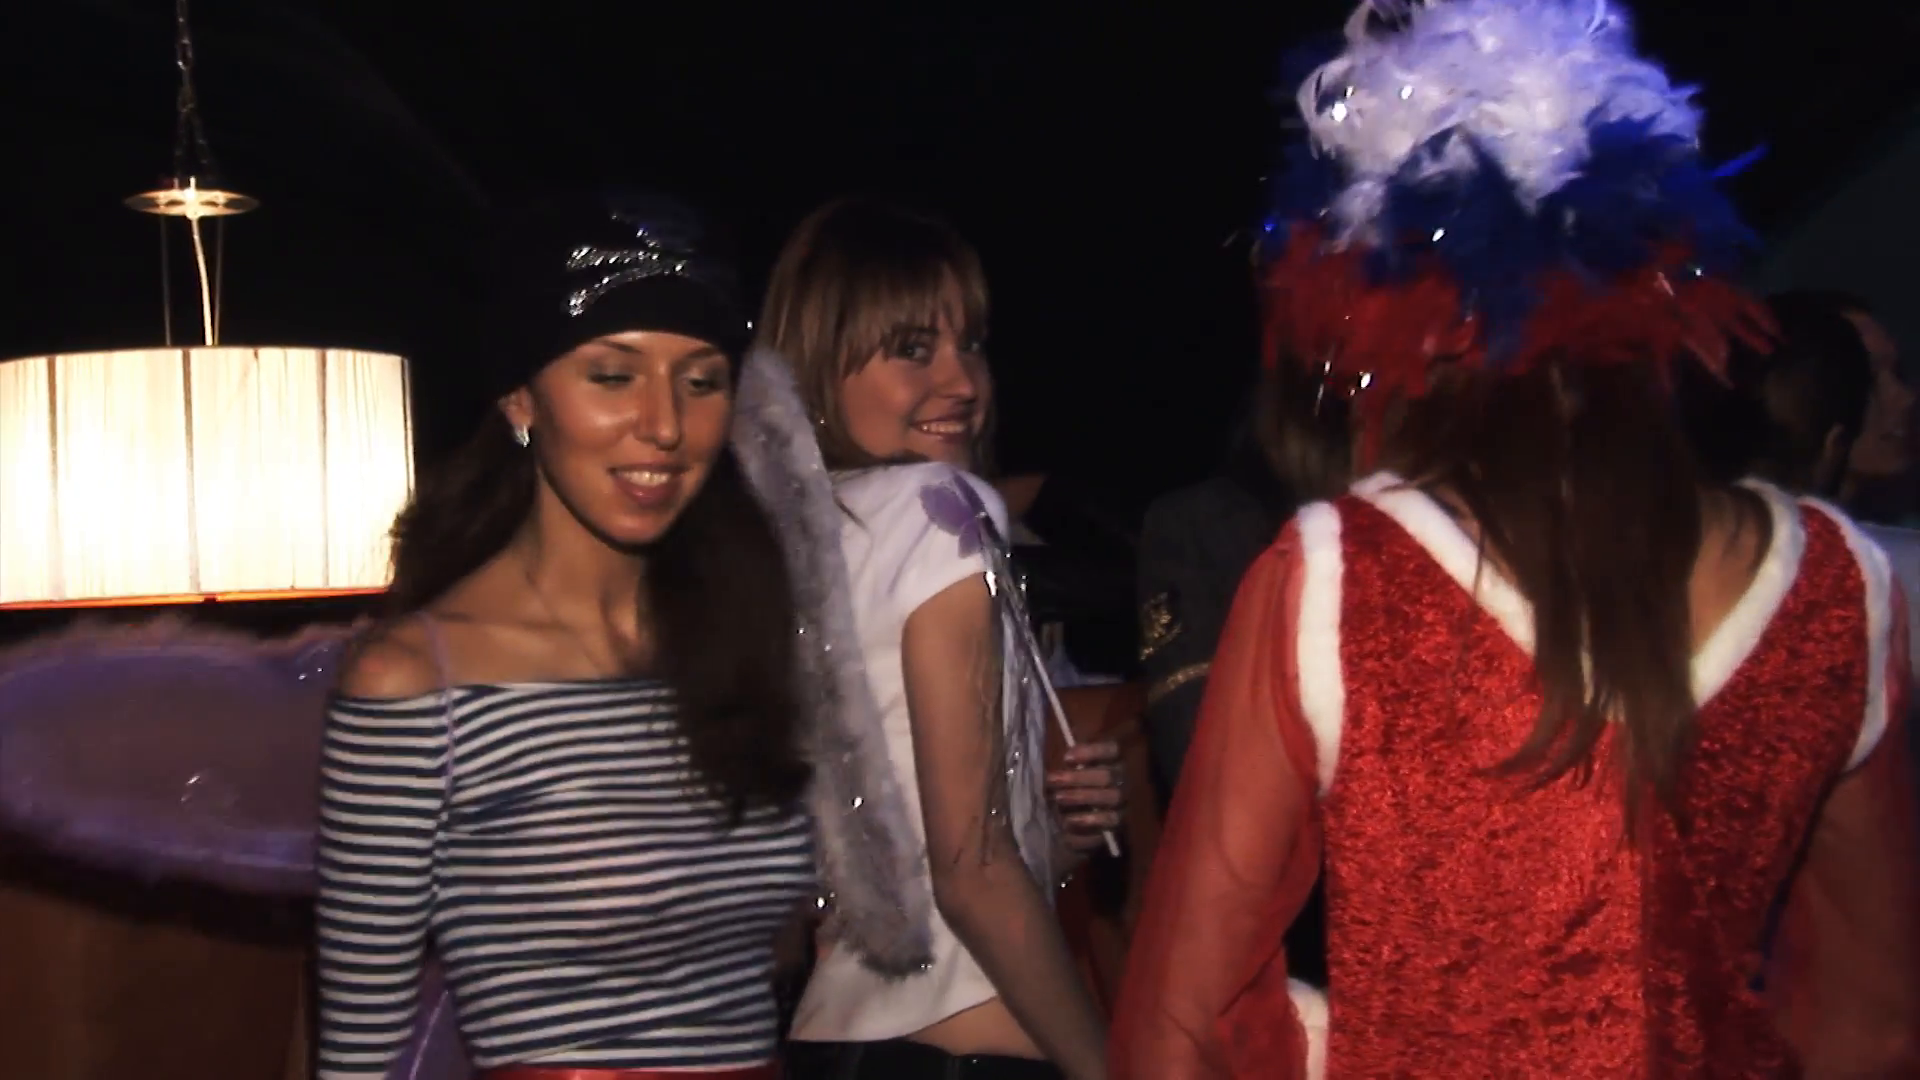 People in costumes dance at Halloween party in nightclub. Realistic ...